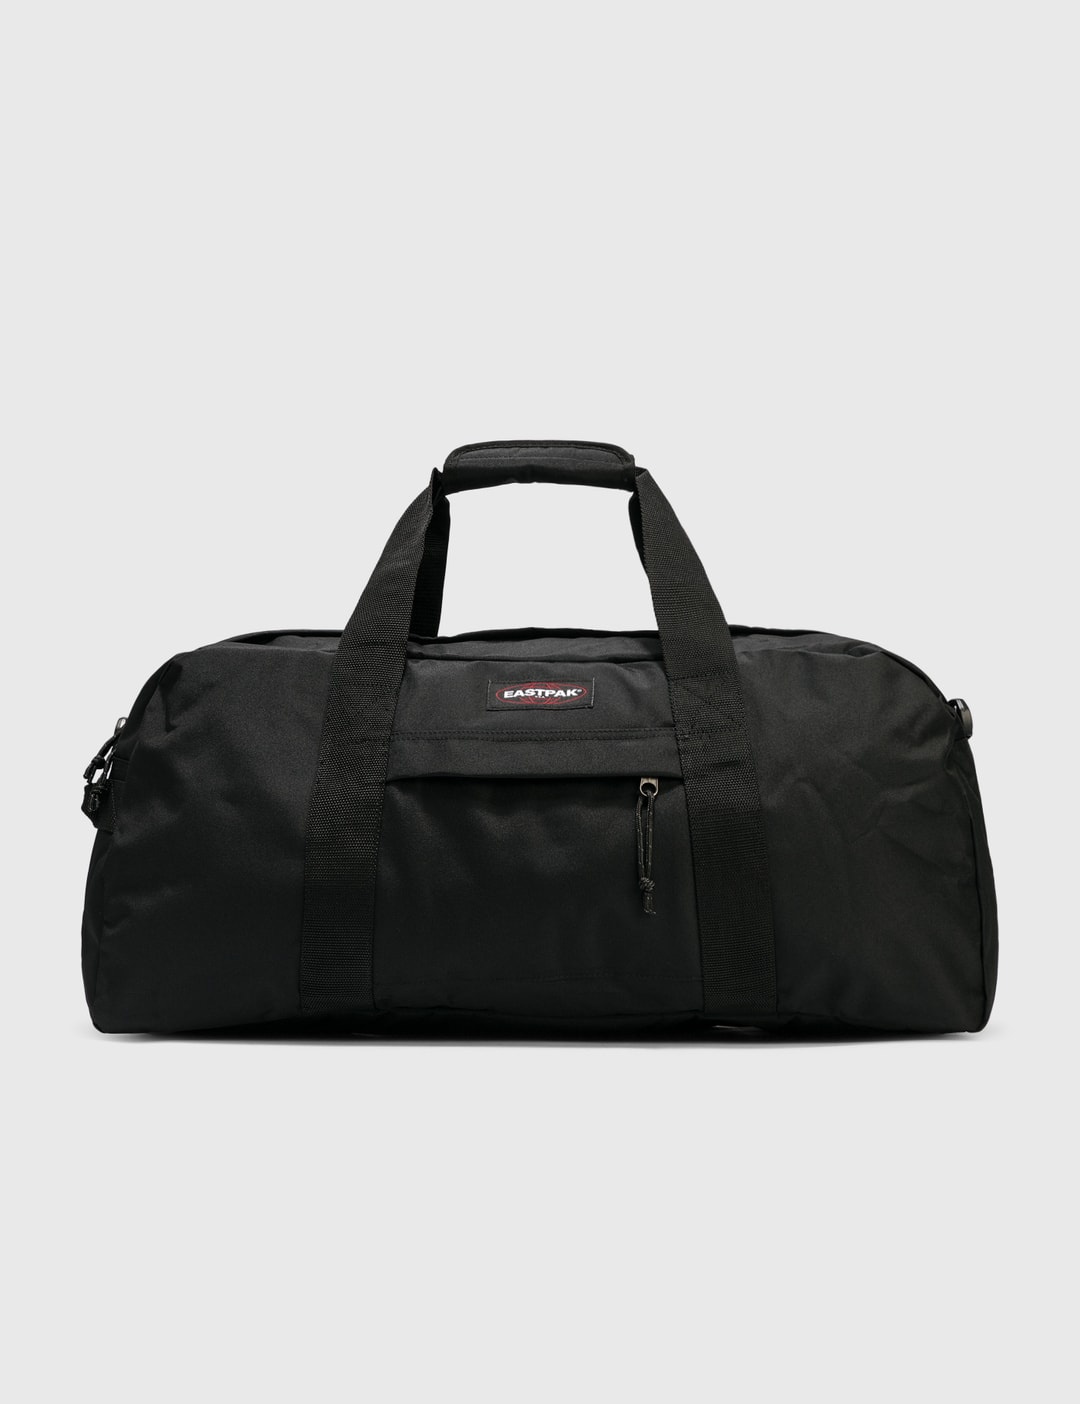 Eastpak - Station+ Duffle Bag | HBX - Globally Curated Fashion and ...